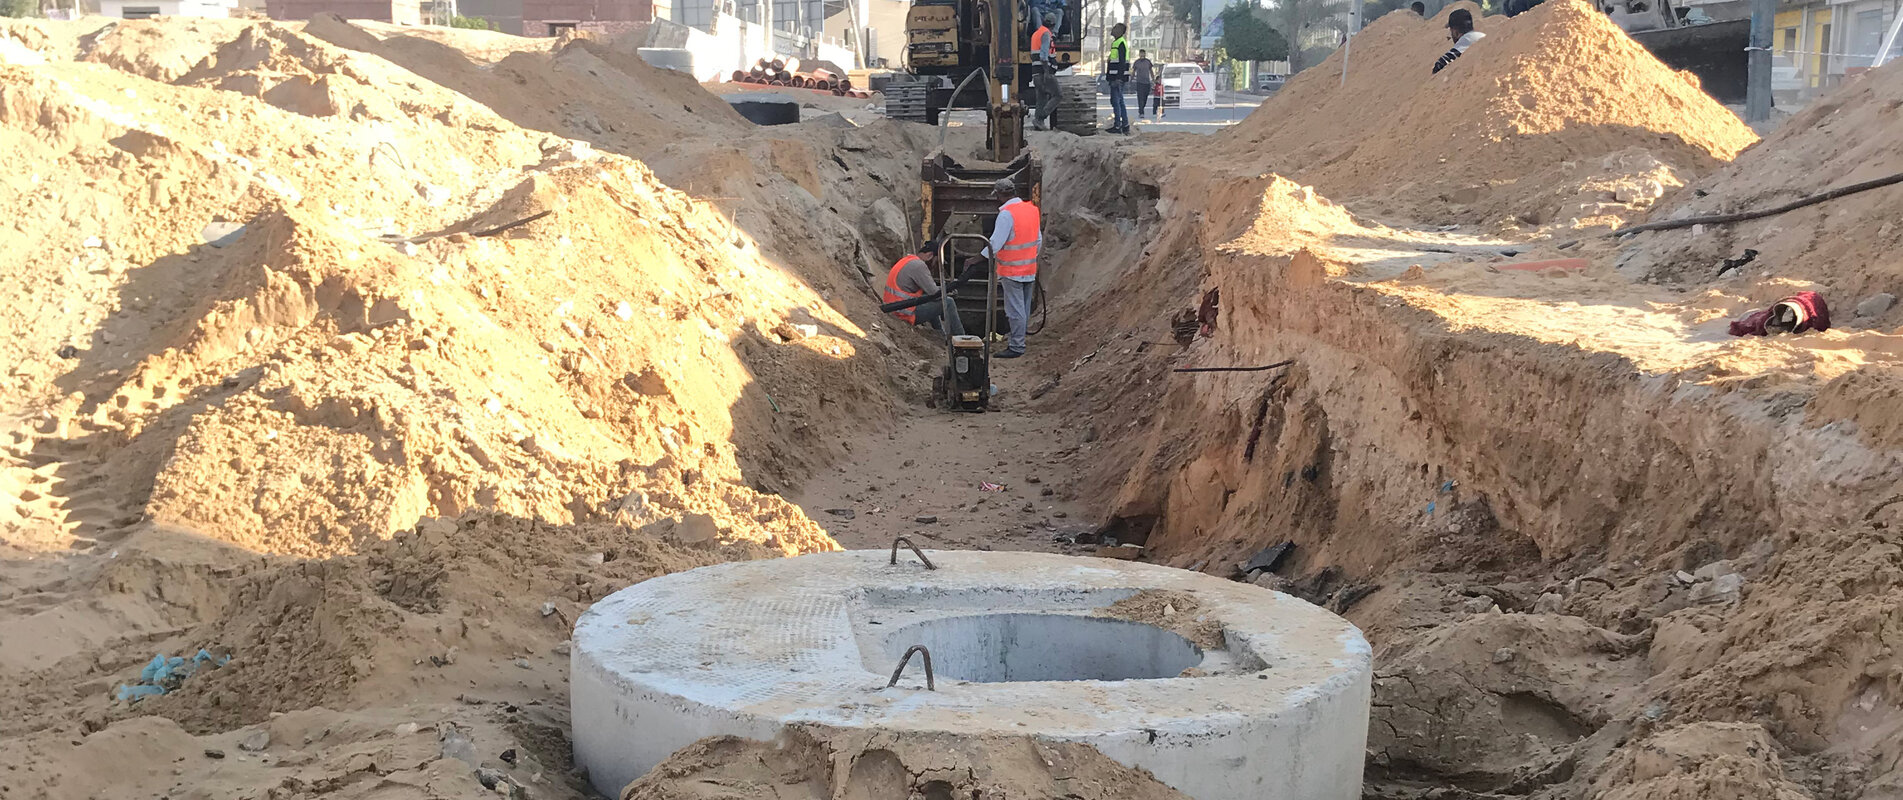 The rehabilitation of water and sewage networks in Beit Lahia, the Gaza Strip. Photo by Palestinian Environment Friends/2021